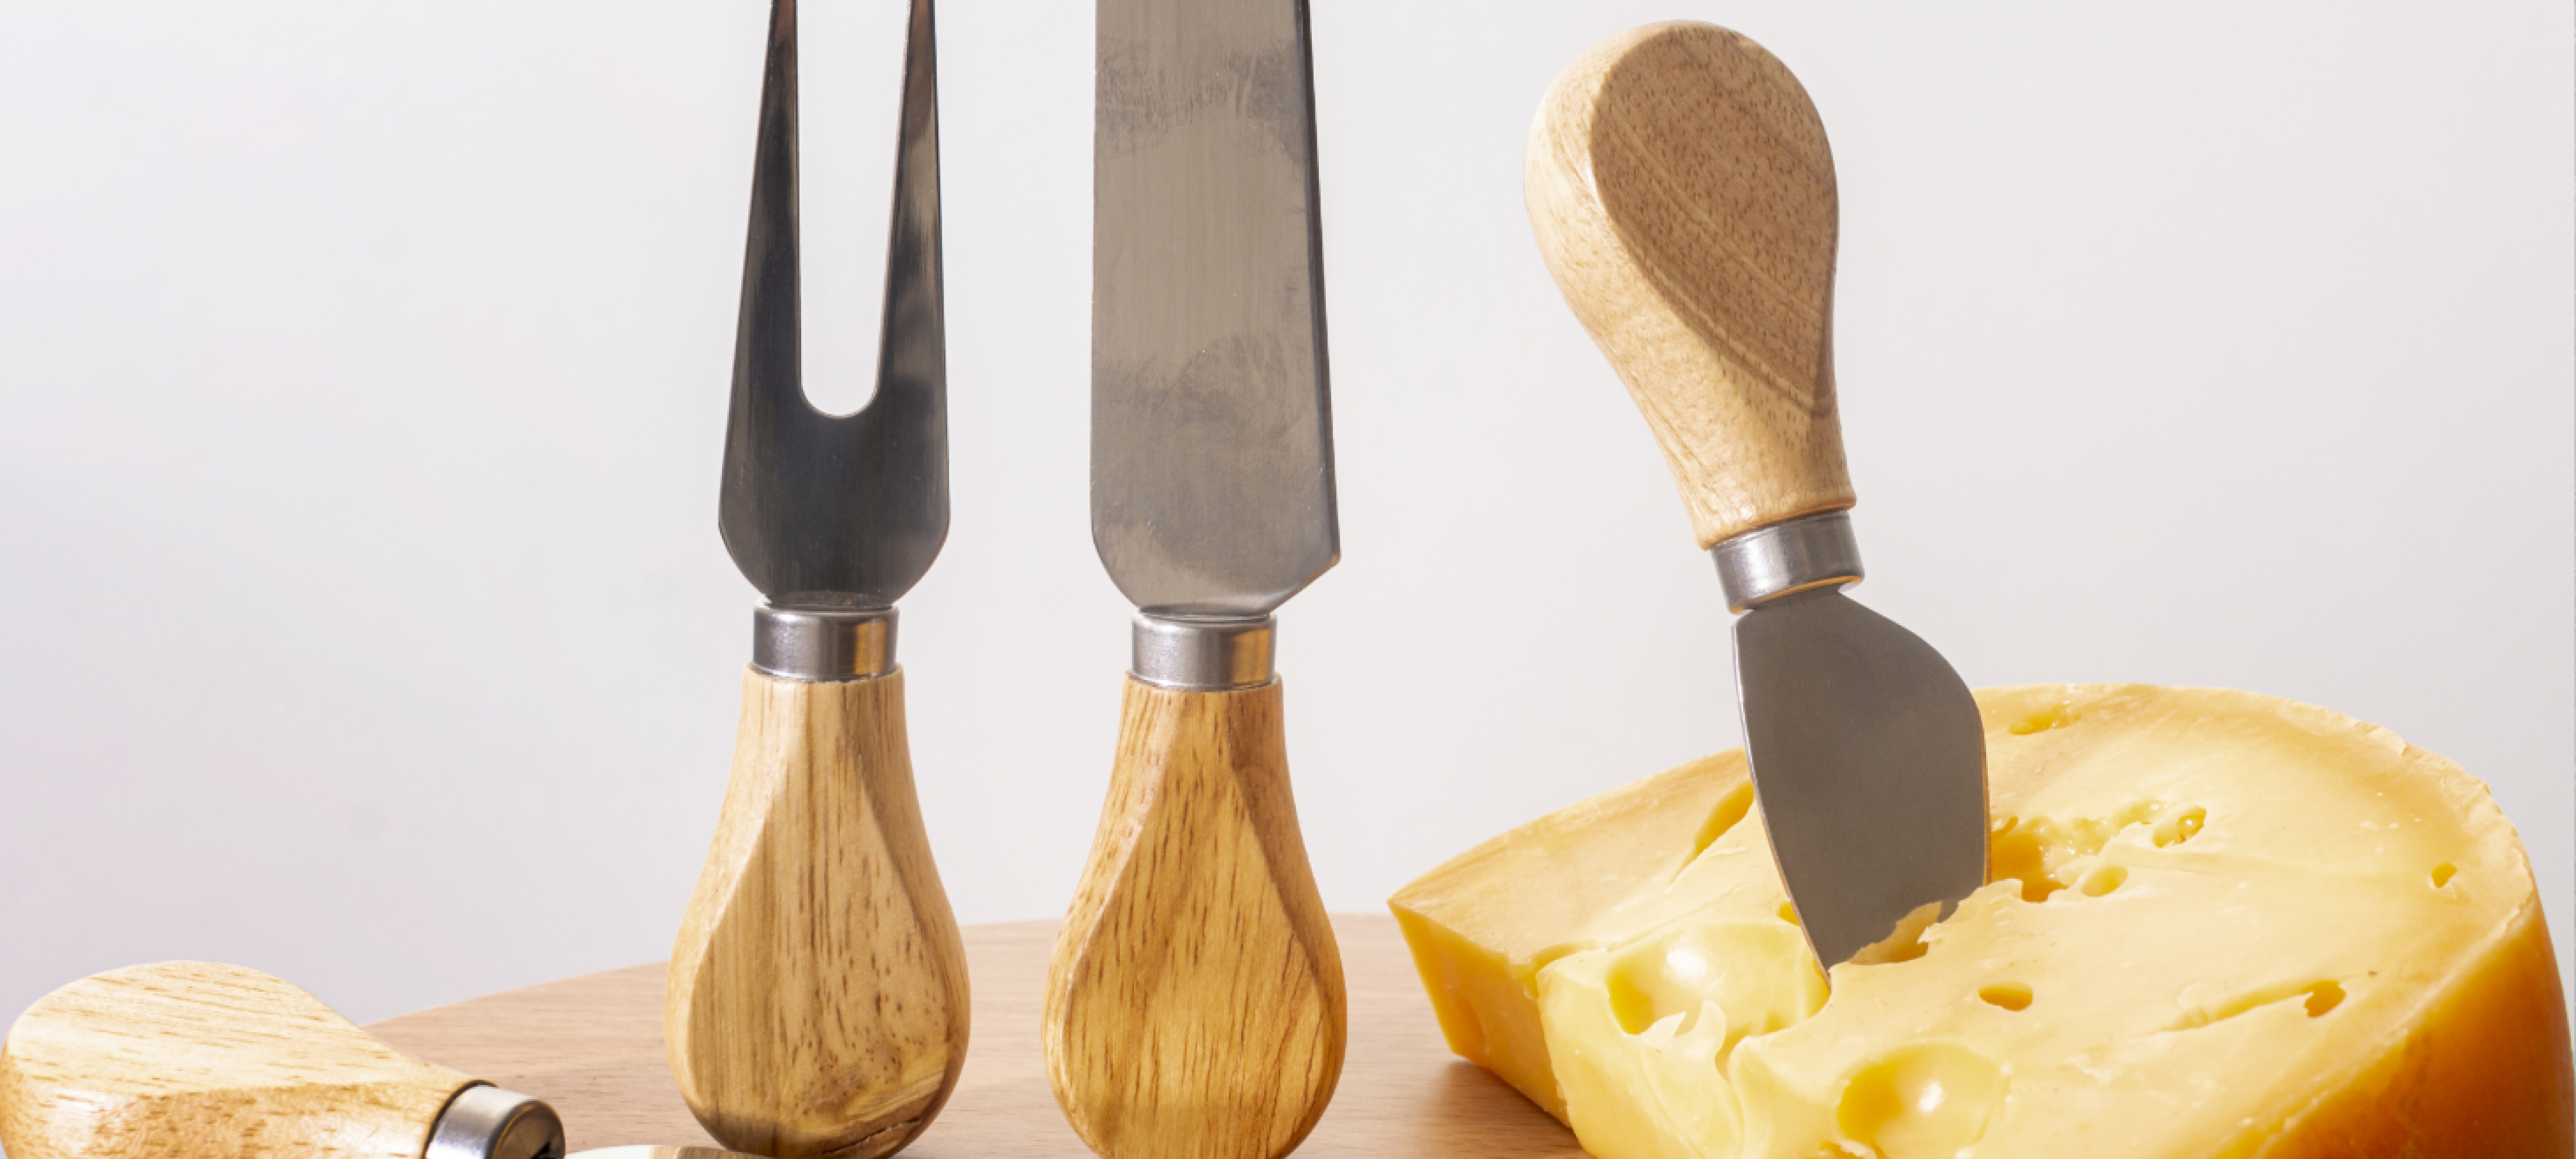 Find the Best Cheese Knives Set from Our Top 10 Selections